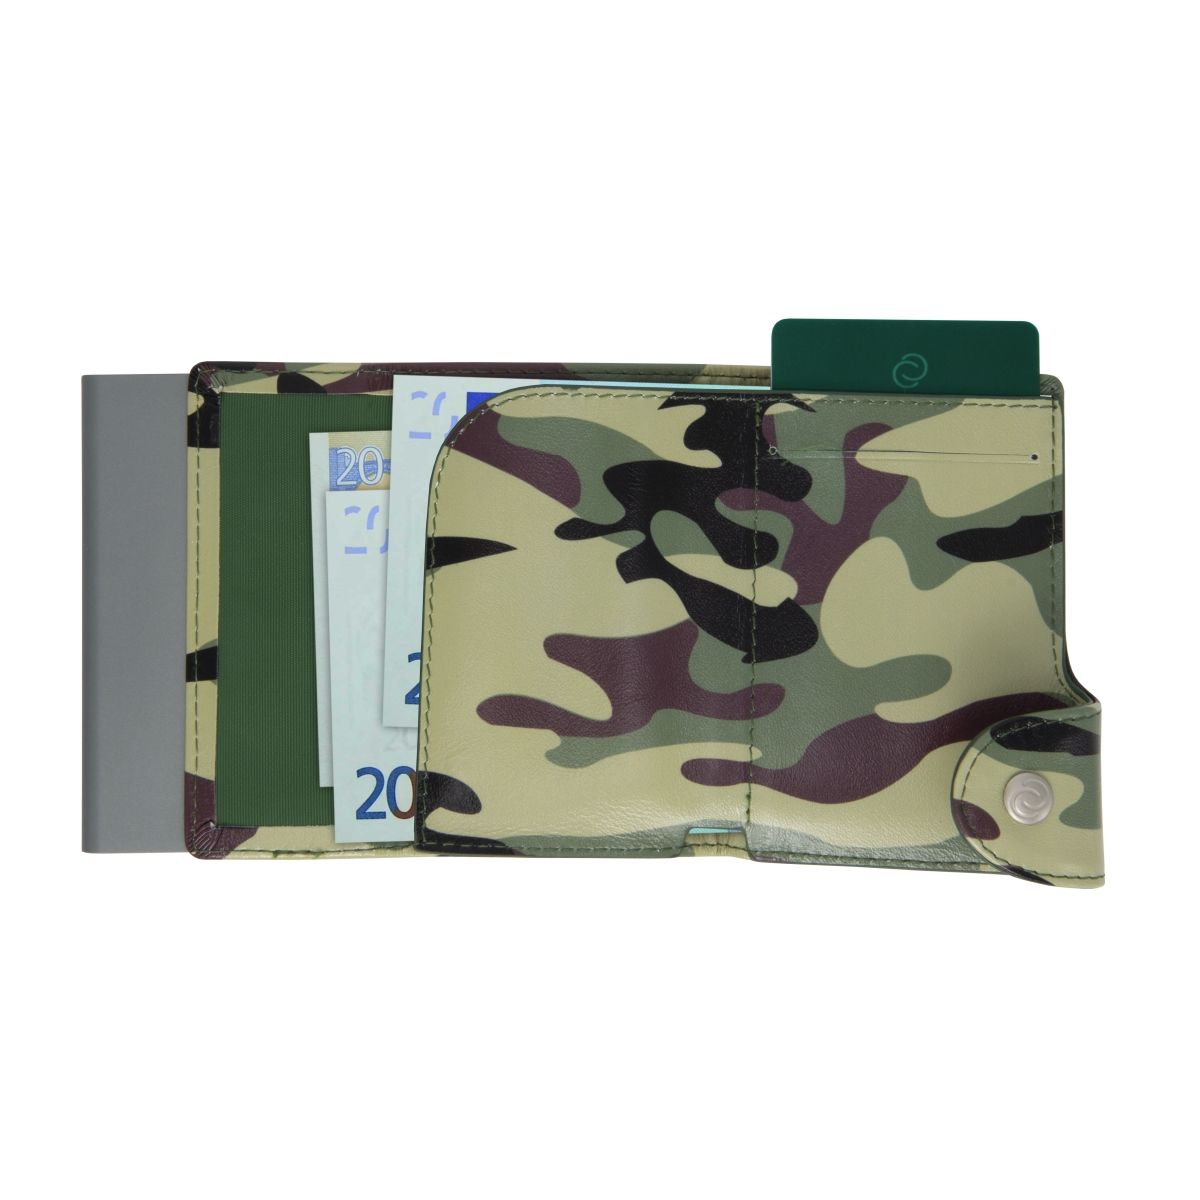 C-Secure Aluminum Card Holder with Genuine Leather - Camo Green